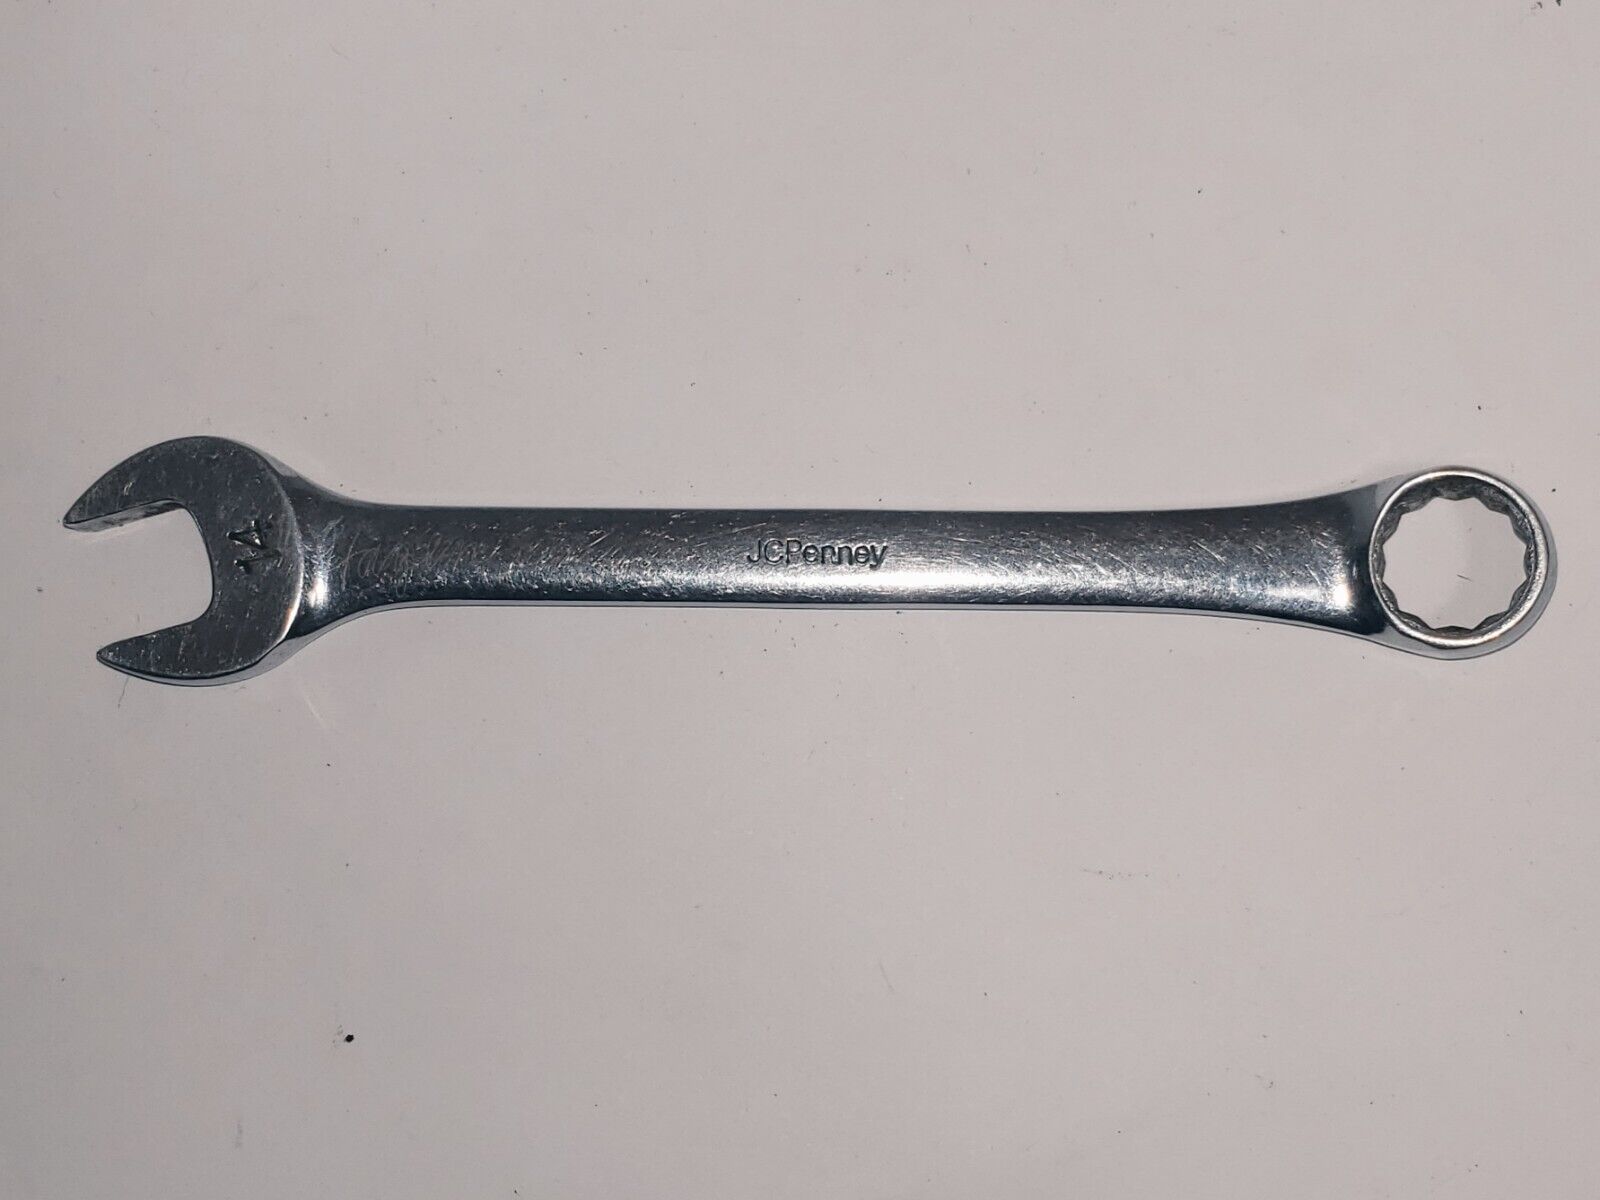 Vintage JC Penney 14 mm Combination Wrench #3471 Made In USA